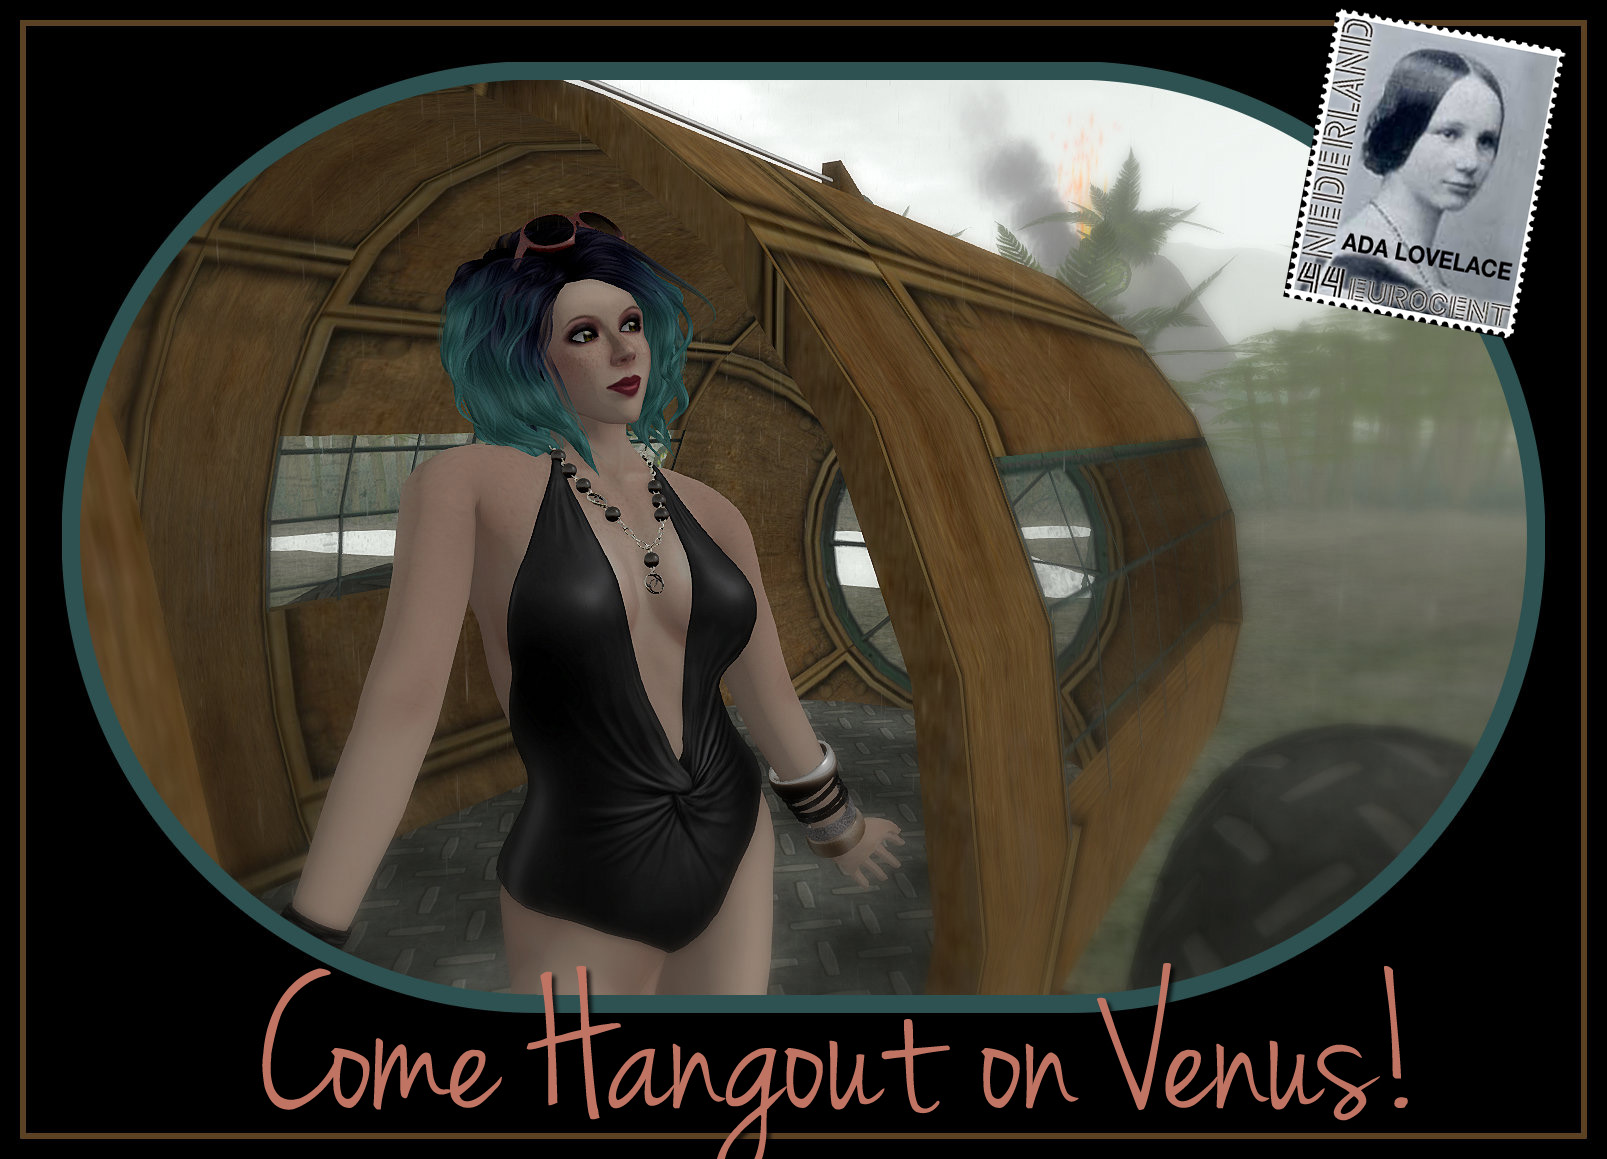 Postcard for "Avatar Hangout" featuring an image of Vanessa Blaylock standing on the landing of a cargo vessel newly landed on Kimika Ying's installation of the surface of the planet Venus